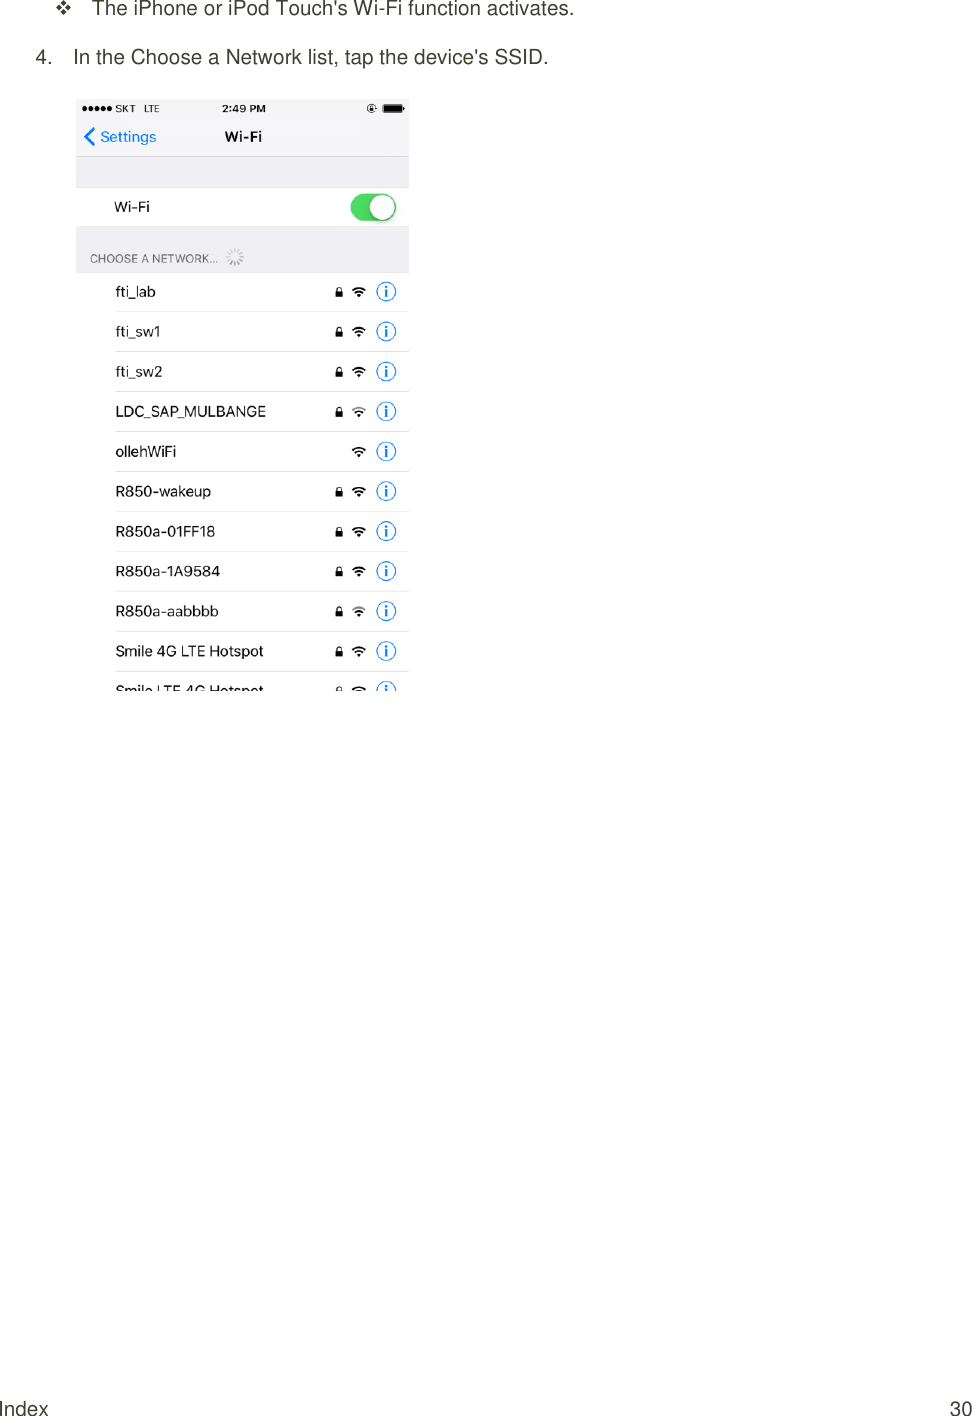 Index  30   The iPhone or iPod Touch&apos;s Wi-Fi function activates. 4.  In the Choose a Network list, tap the device&apos;s SSID.   